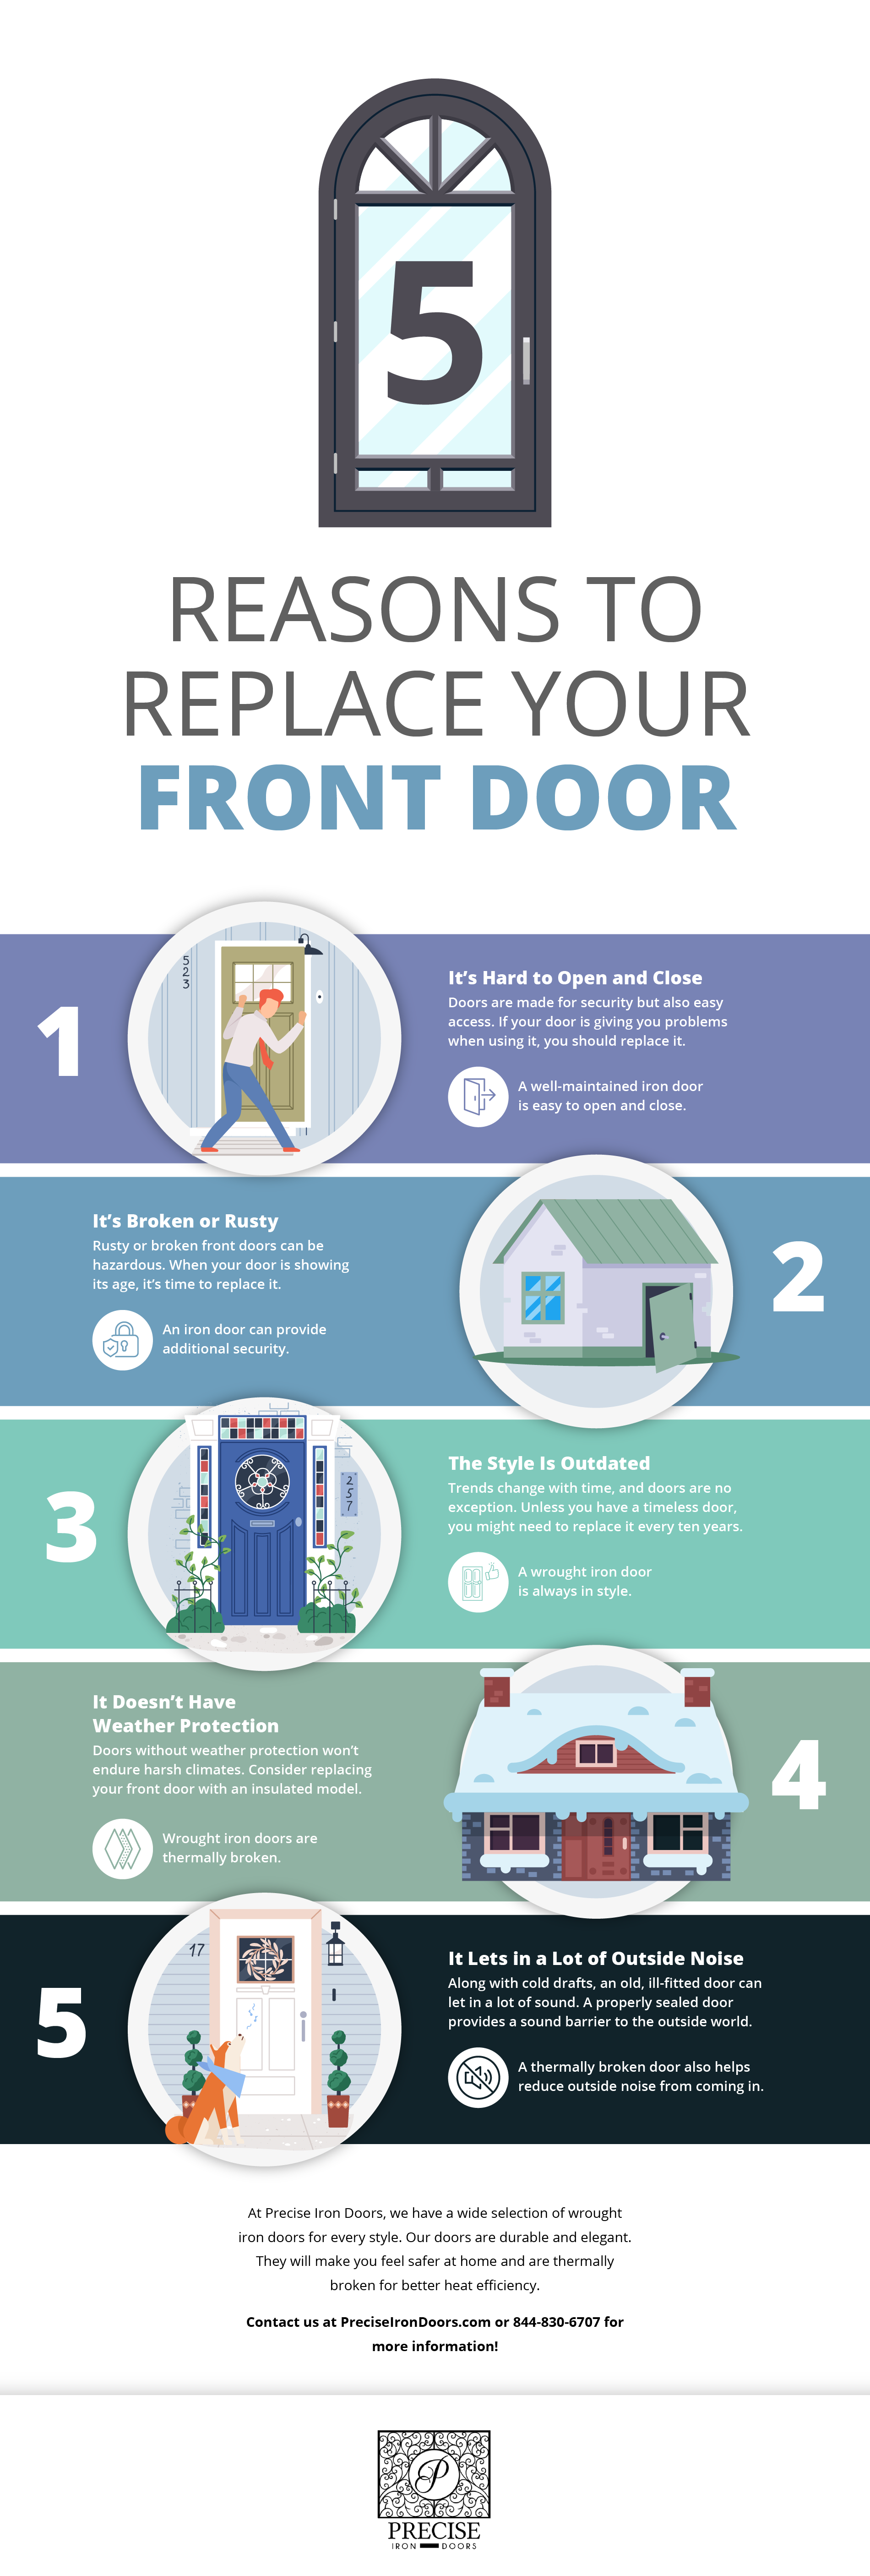 Reasons to Replace Your Front Door Infographic